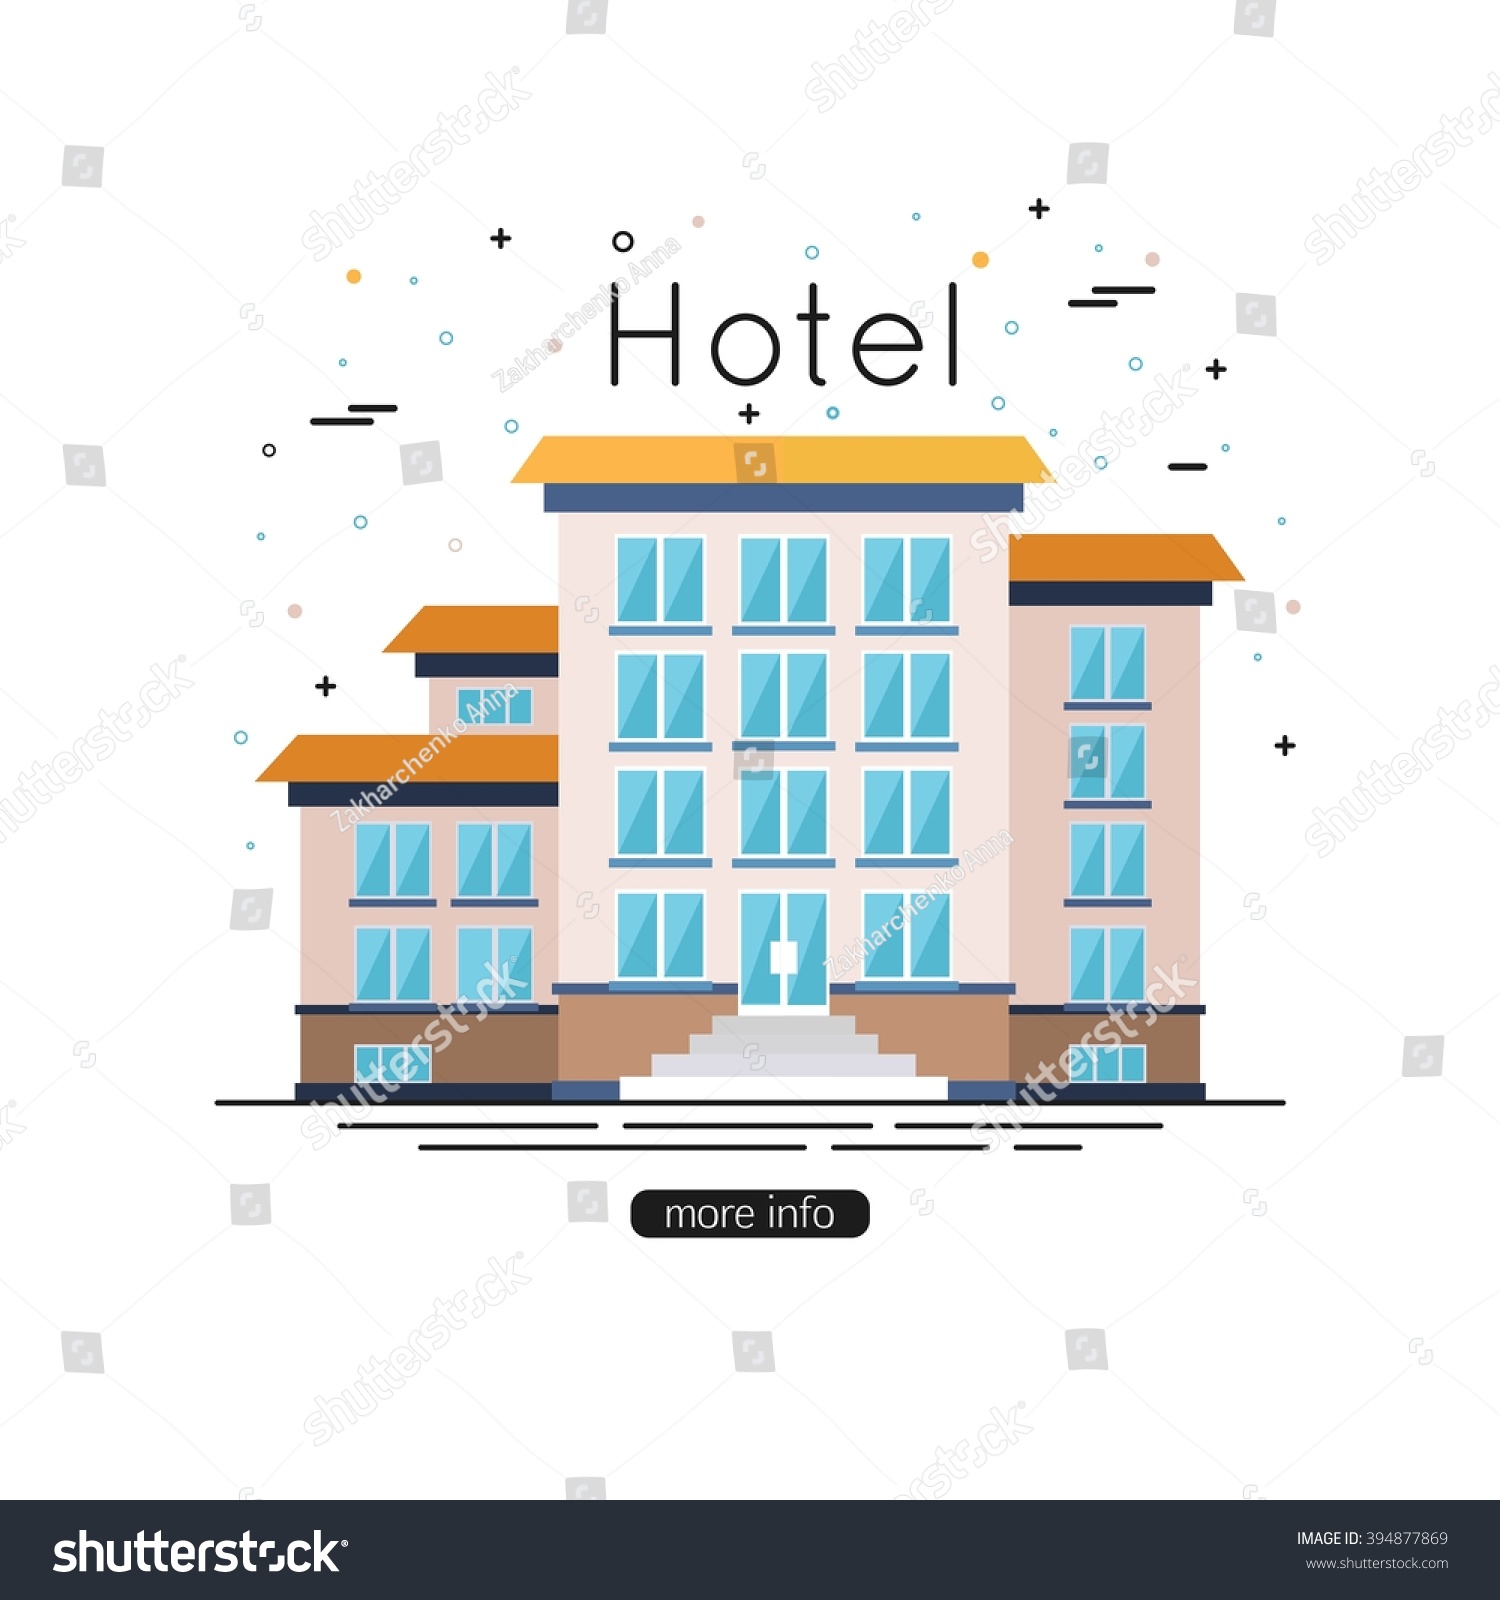 clipart hotel images - photo #30